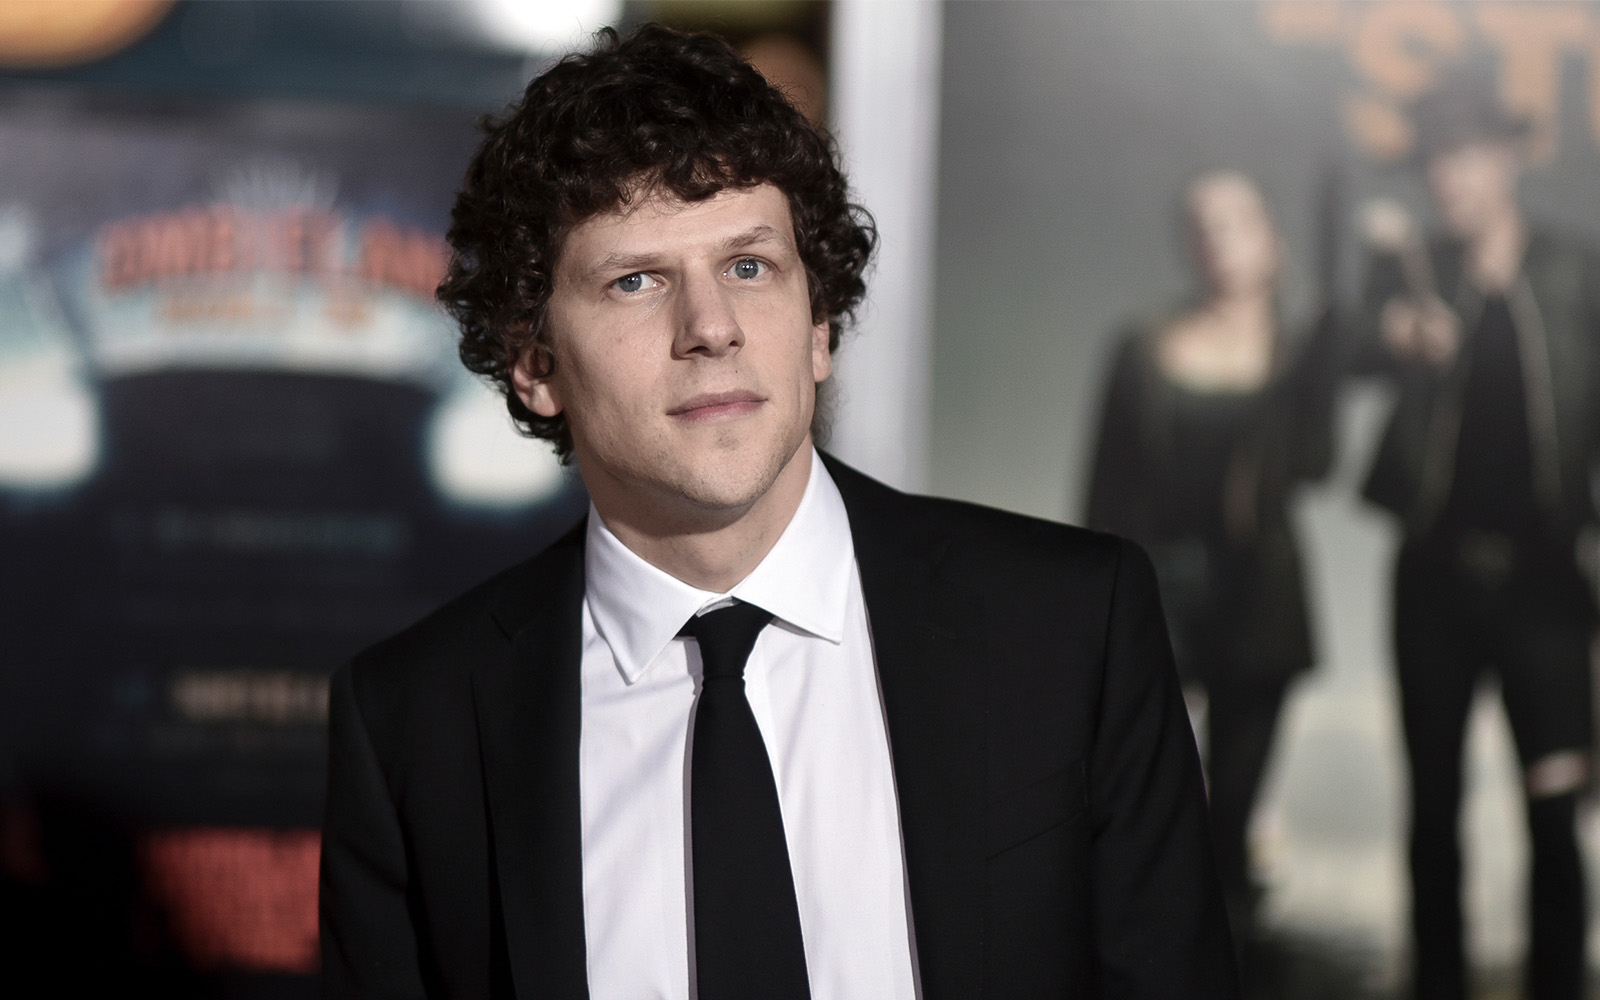 Is Zombieland 2 Done Filming? Jesse Eisenberg Says Almost